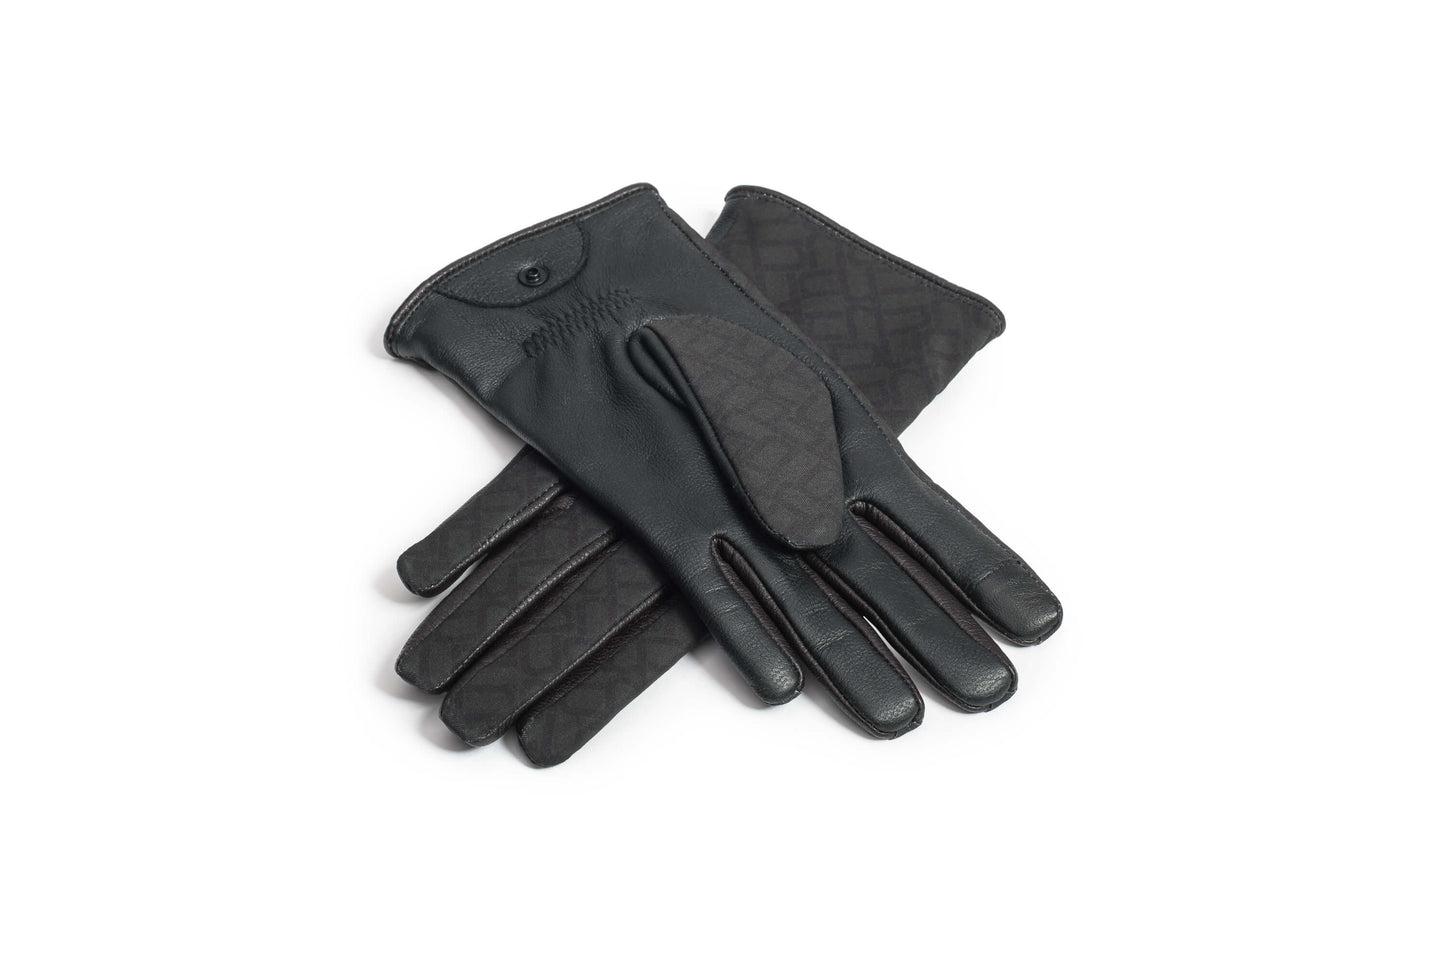 Mai Ladies Classic Driving Gloves with lambskin exterior, cashmere lining, touch screen fingertips, and elasticized wrists, in Dark Monogram